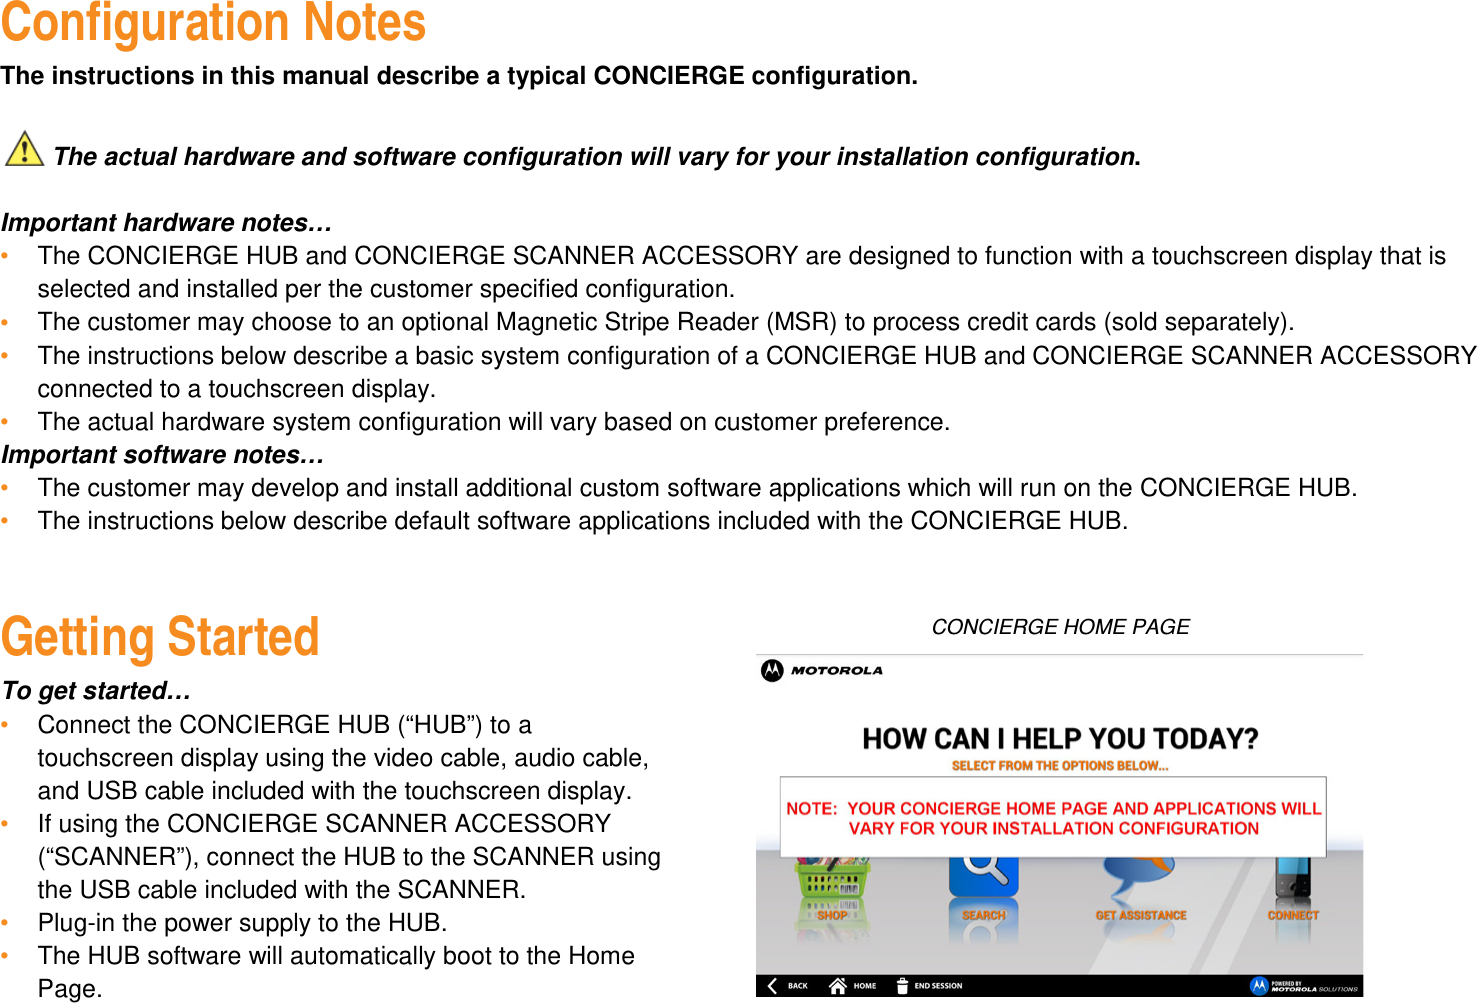 Configuration Notes The instructions in this manual describe a typical CONCIERGE configuration.     The actual hardware and software configuration will vary for your installation configuration.  Important hardware notes… •  The CONCIERGE HUB and CONCIERGE SCANNER ACCESSORY are designed to function with a touchscreen display that is selected and installed per the customer specified configuration. •  The customer may choose to an optional Magnetic Stripe Reader (MSR) to process credit cards (sold separately). •  The instructions below describe a basic system configuration of a CONCIERGE HUB and CONCIERGE SCANNER ACCESSORY connected to a touchscreen display. •  The actual hardware system configuration will vary based on customer preference. Important software notes… •  The customer may develop and install additional custom software applications which will run on the CONCIERGE HUB. •  The instructions below describe default software applications included with the CONCIERGE HUB.   Getting Started To get started… •  Connect the CONCIERGE HUB (“HUB”) to a touchscreen display using the video cable, audio cable, and USB cable included with the touchscreen display. •  If using the CONCIERGE SCANNER ACCESSORY (“SCANNER”), connect the HUB to the SCANNER using the USB cable included with the SCANNER. •  Plug-in the power supply to the HUB. •  The HUB software will automatically boot to the Home Page.CONCIERGE HOME PAGE 